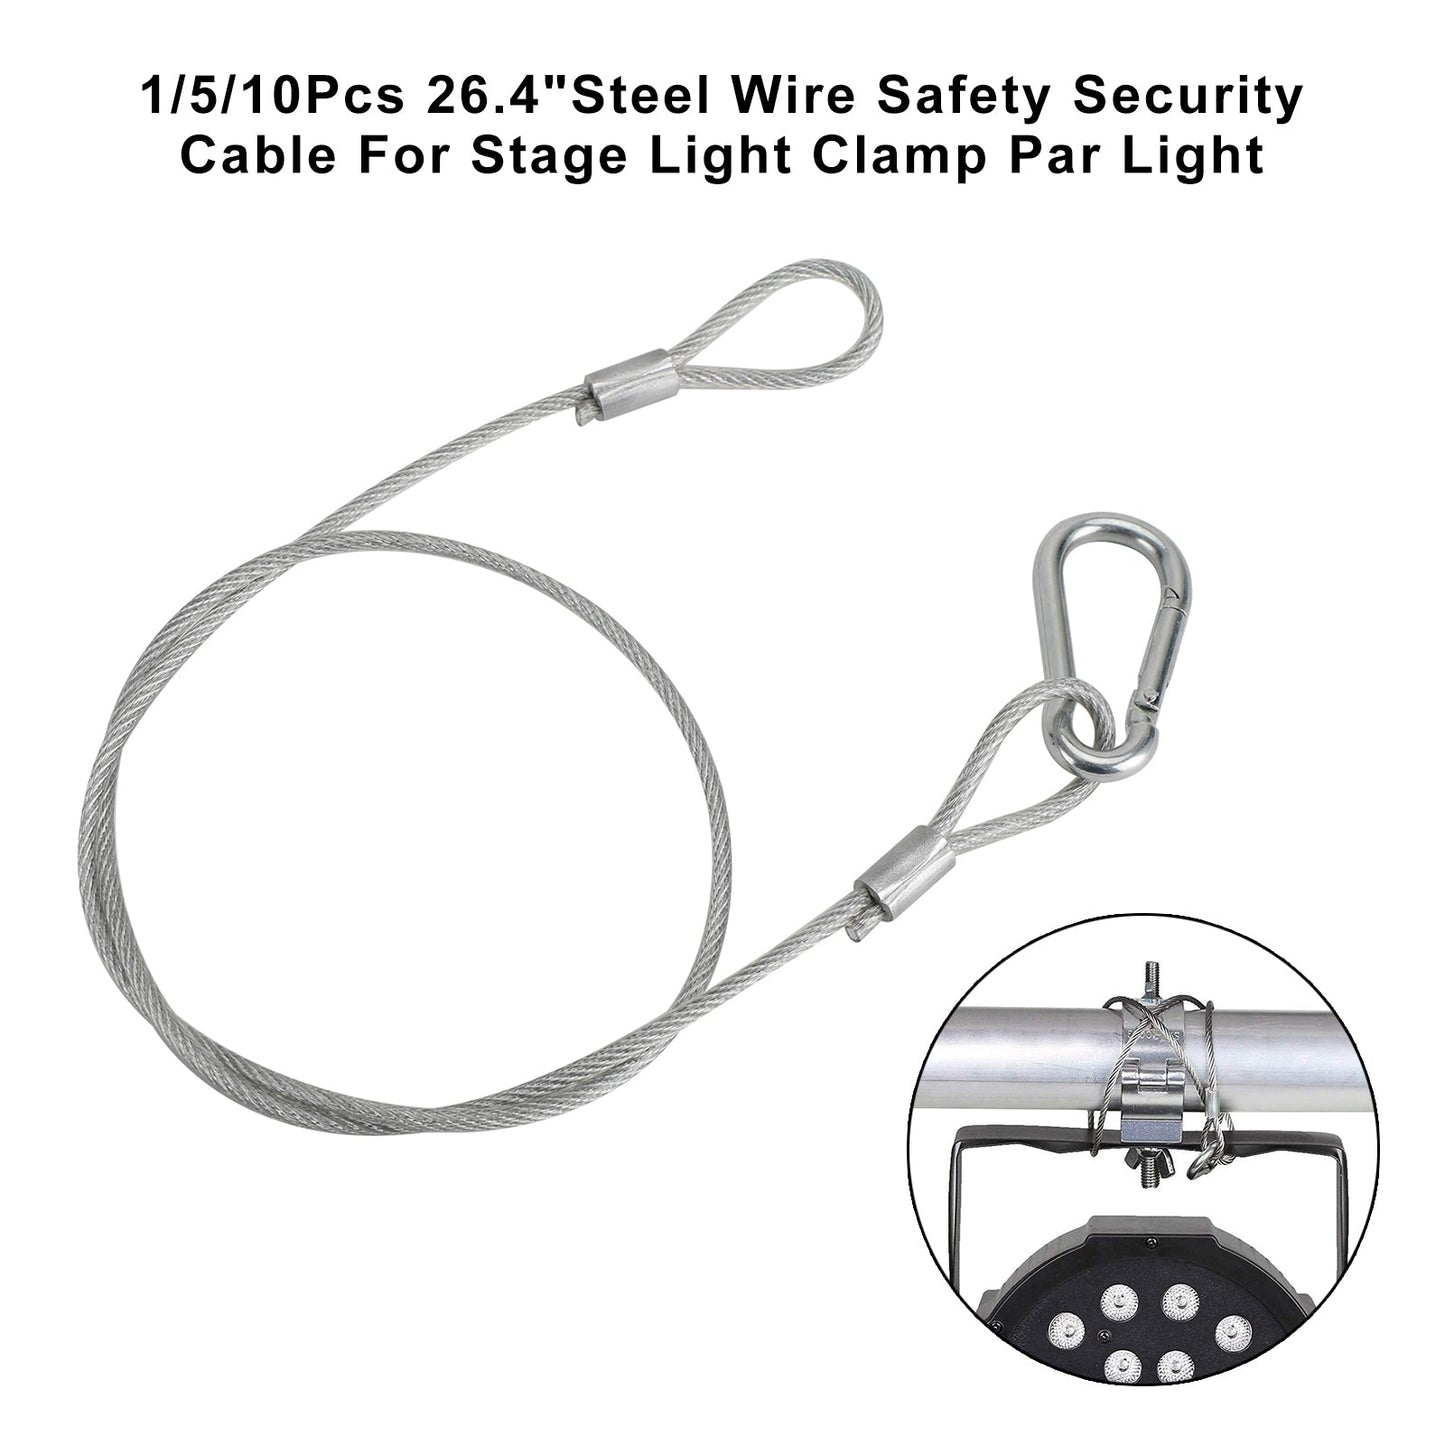 1/5/10Pcs 26.4"Steel Wire Safety Security Cable For Stage Light Clamp Par Light